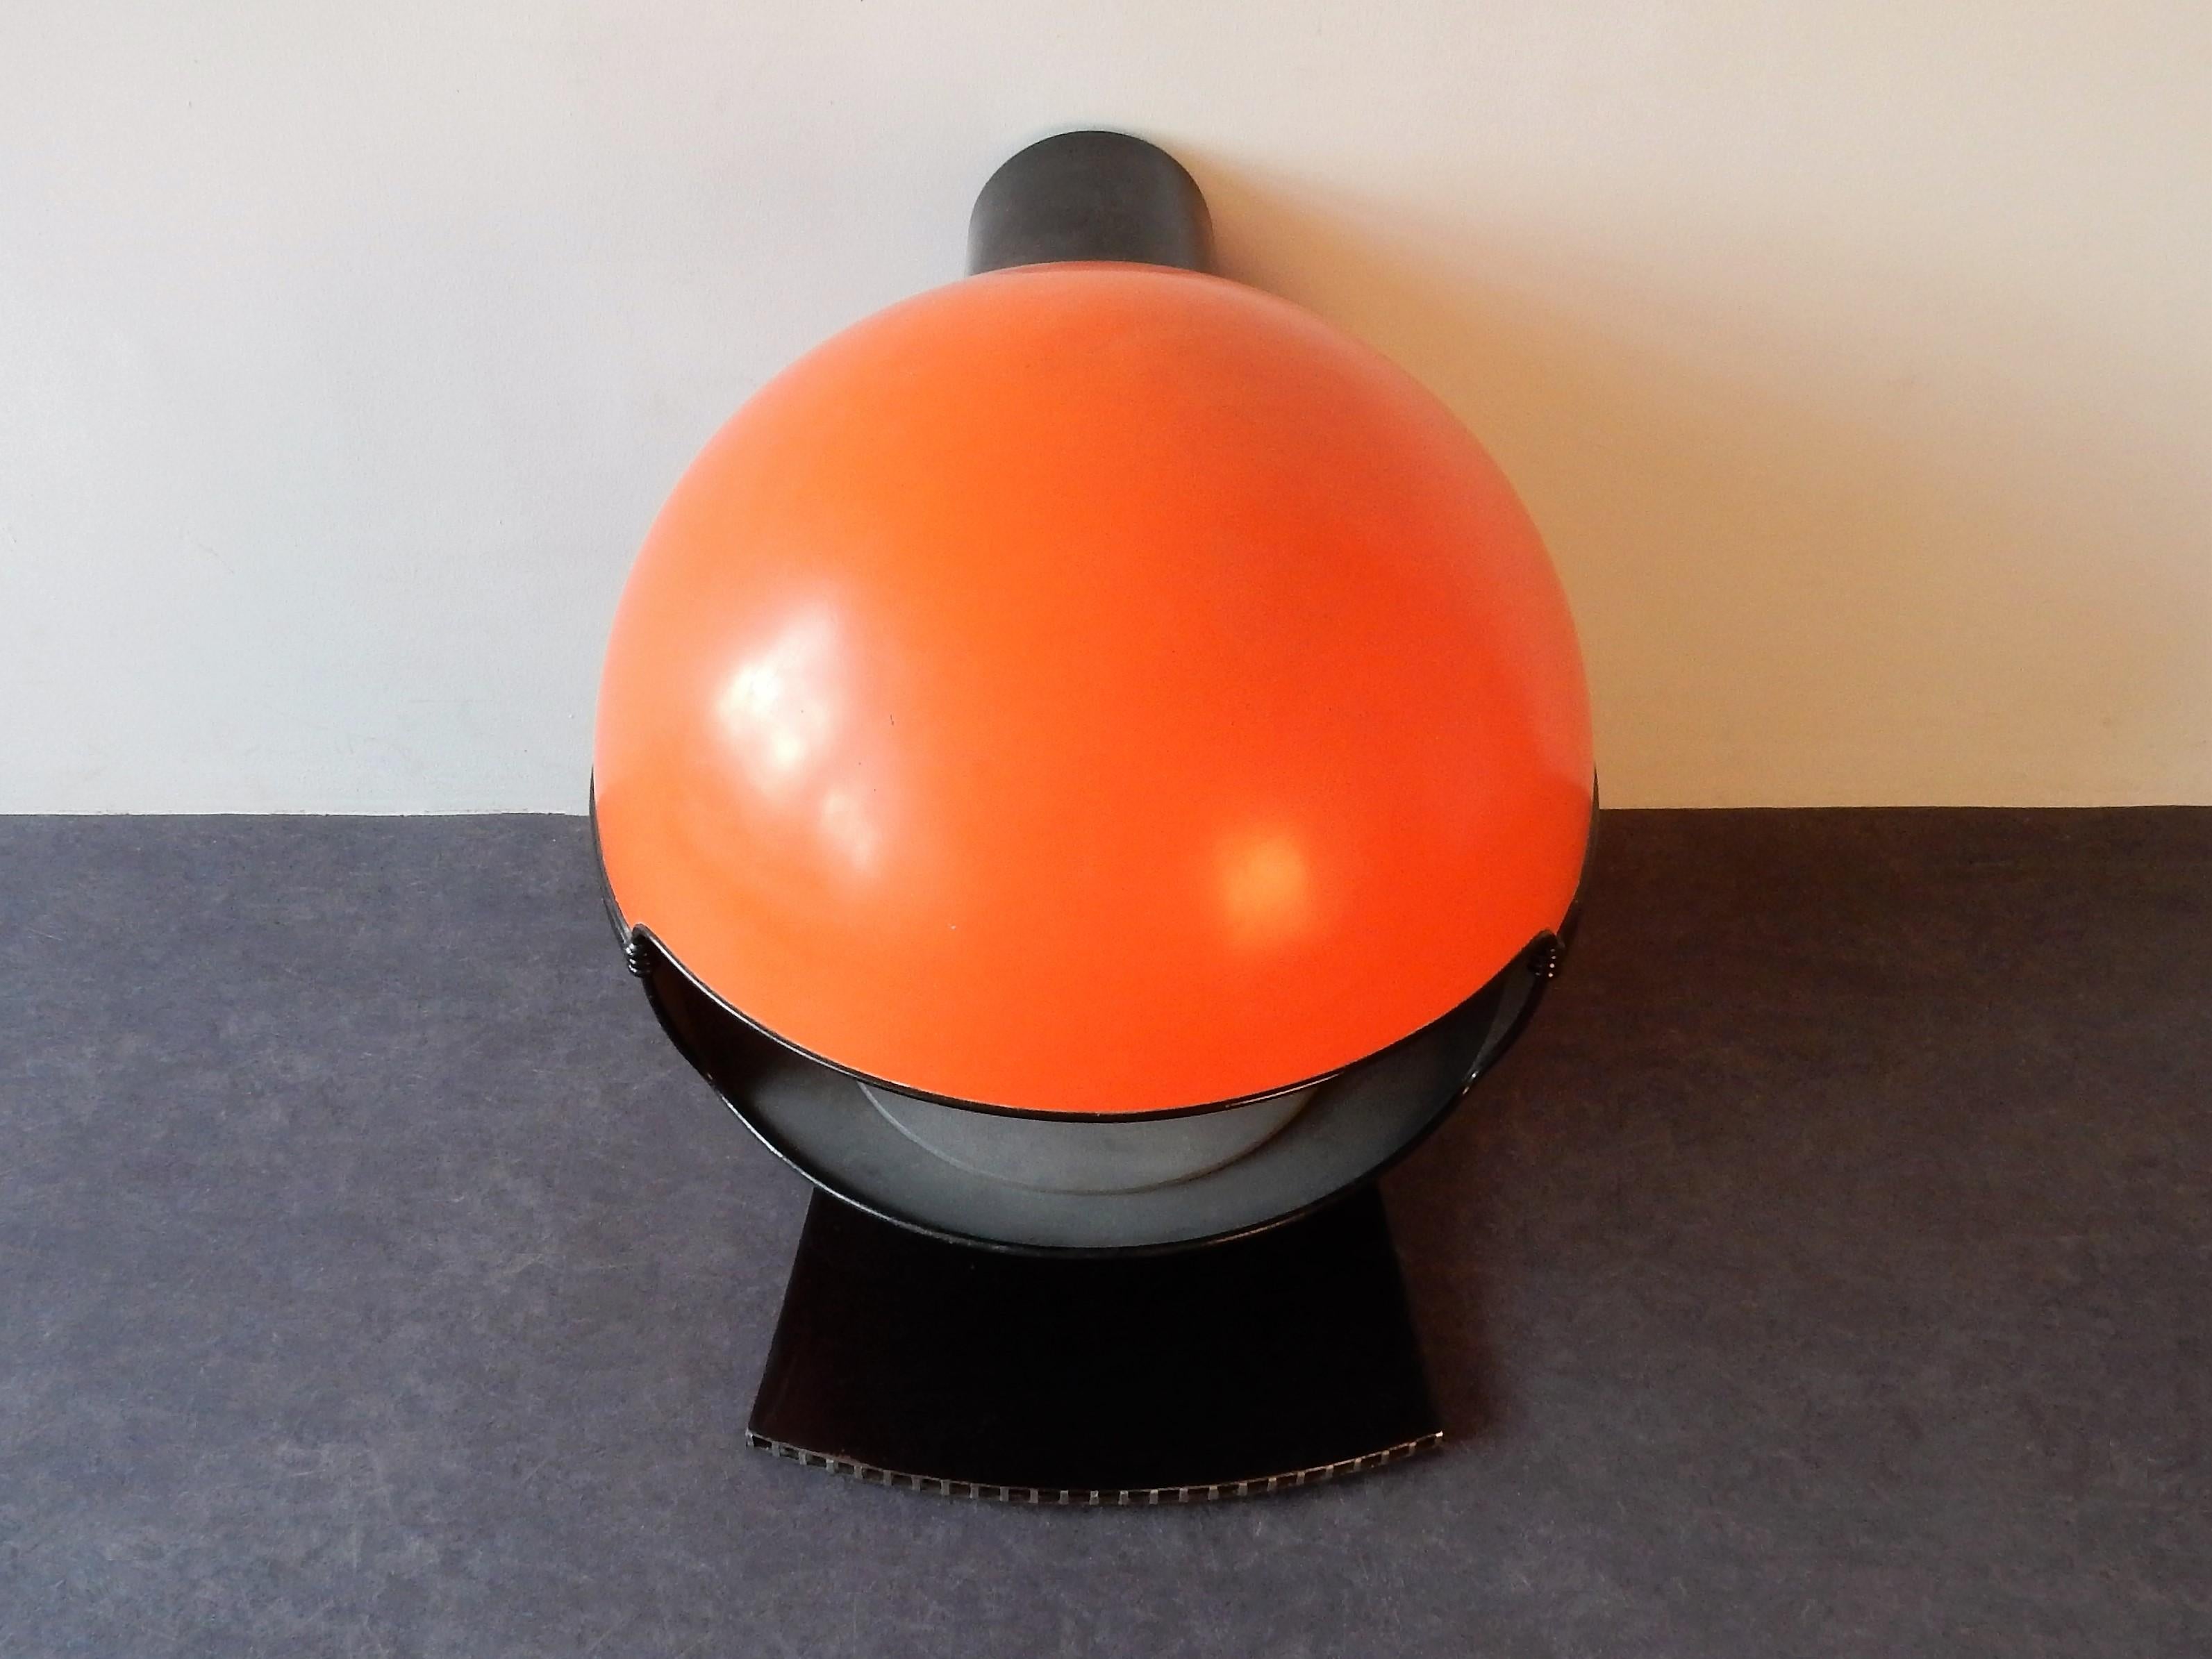 This ball shaped gas heater, model 